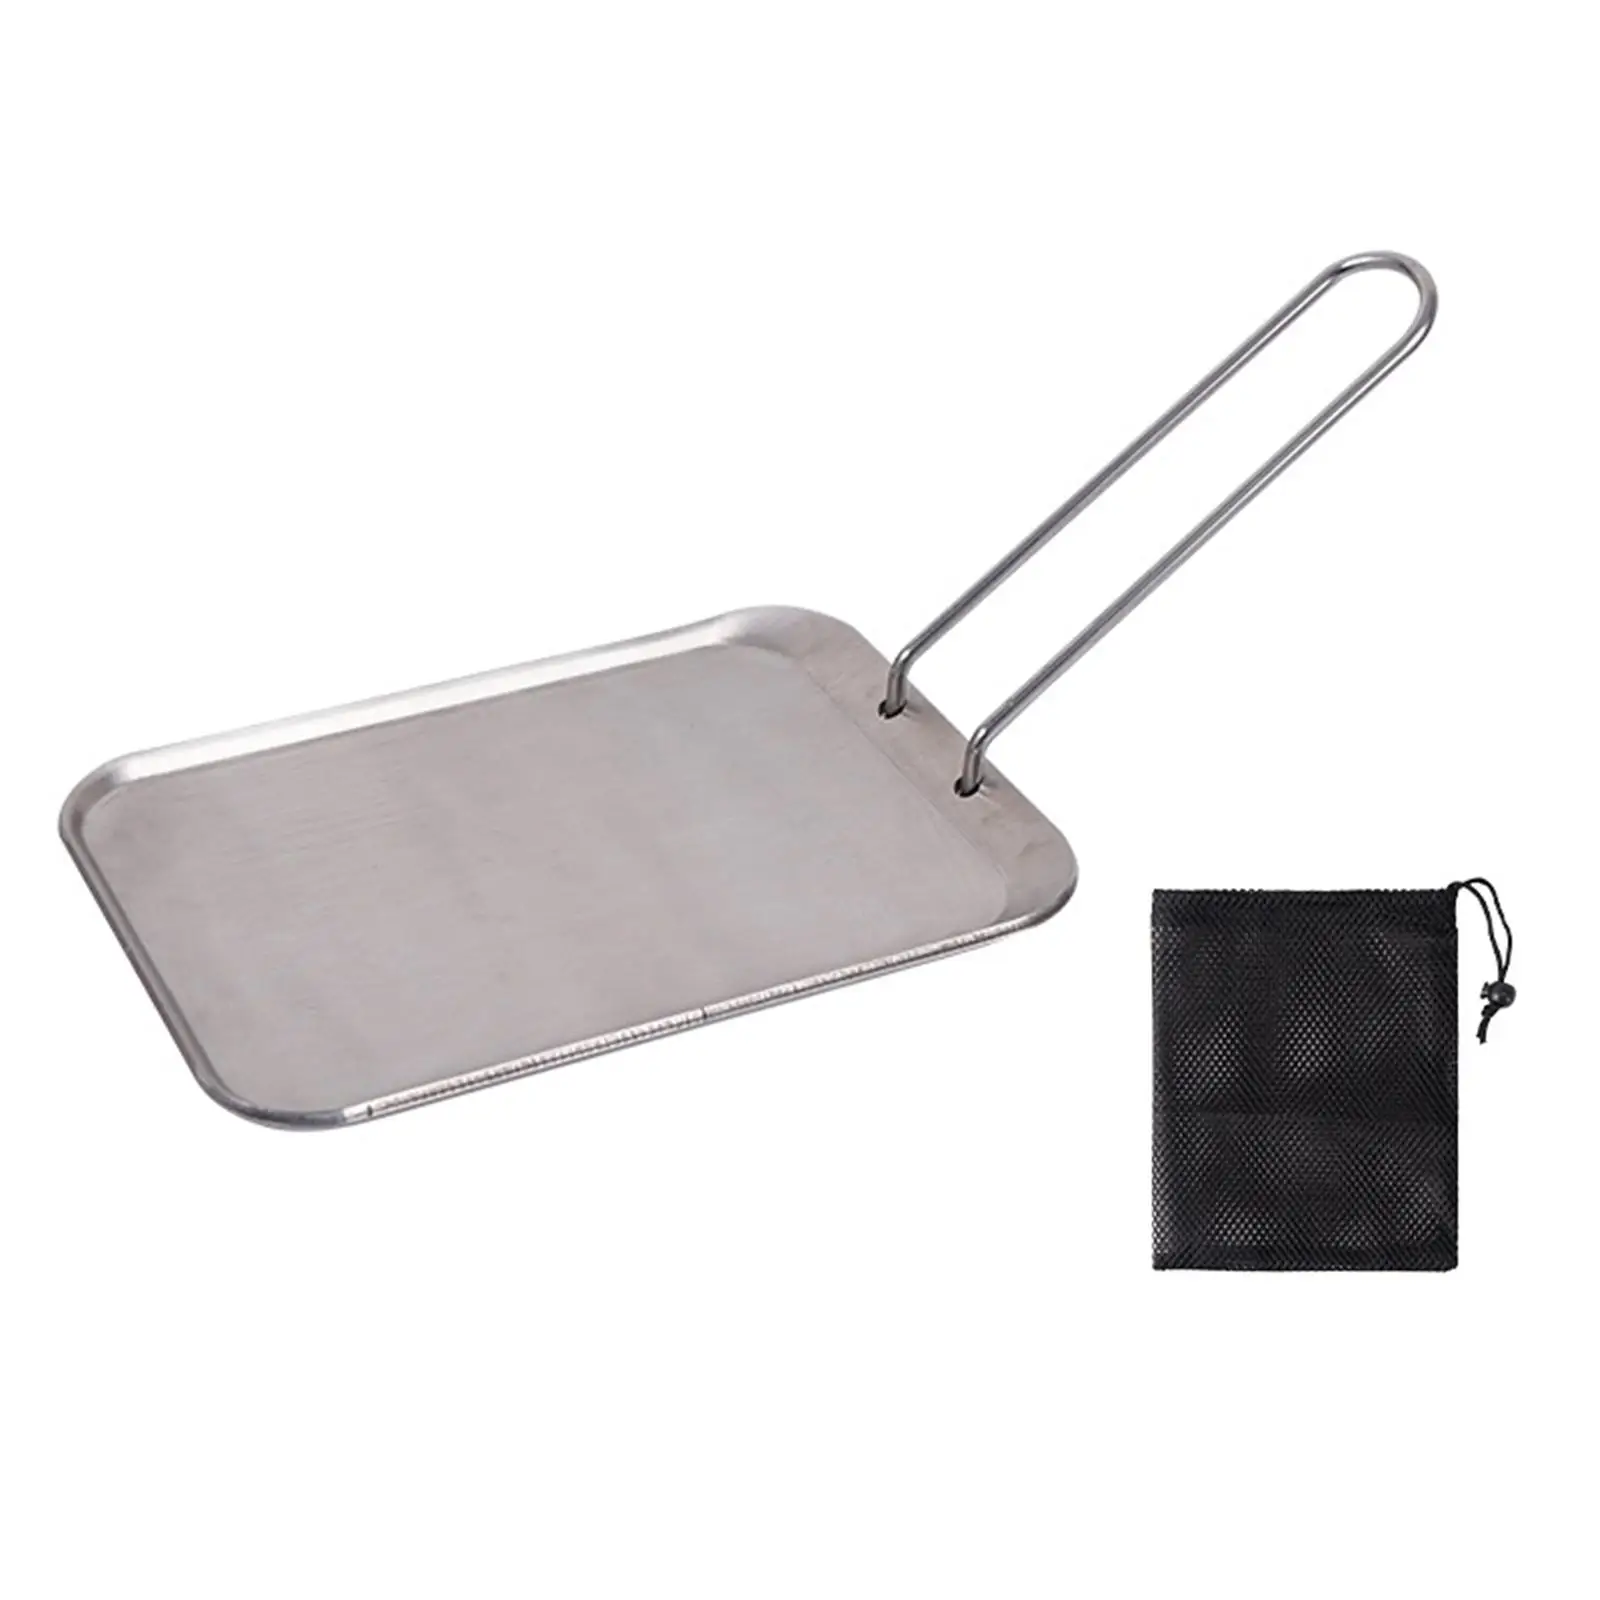 Frying Pan Griddle Grilling Pan Kitchen with Detachable Handle Grill Pan for Stoves Tops for Vegetables Meat Steak Fish Outdoor